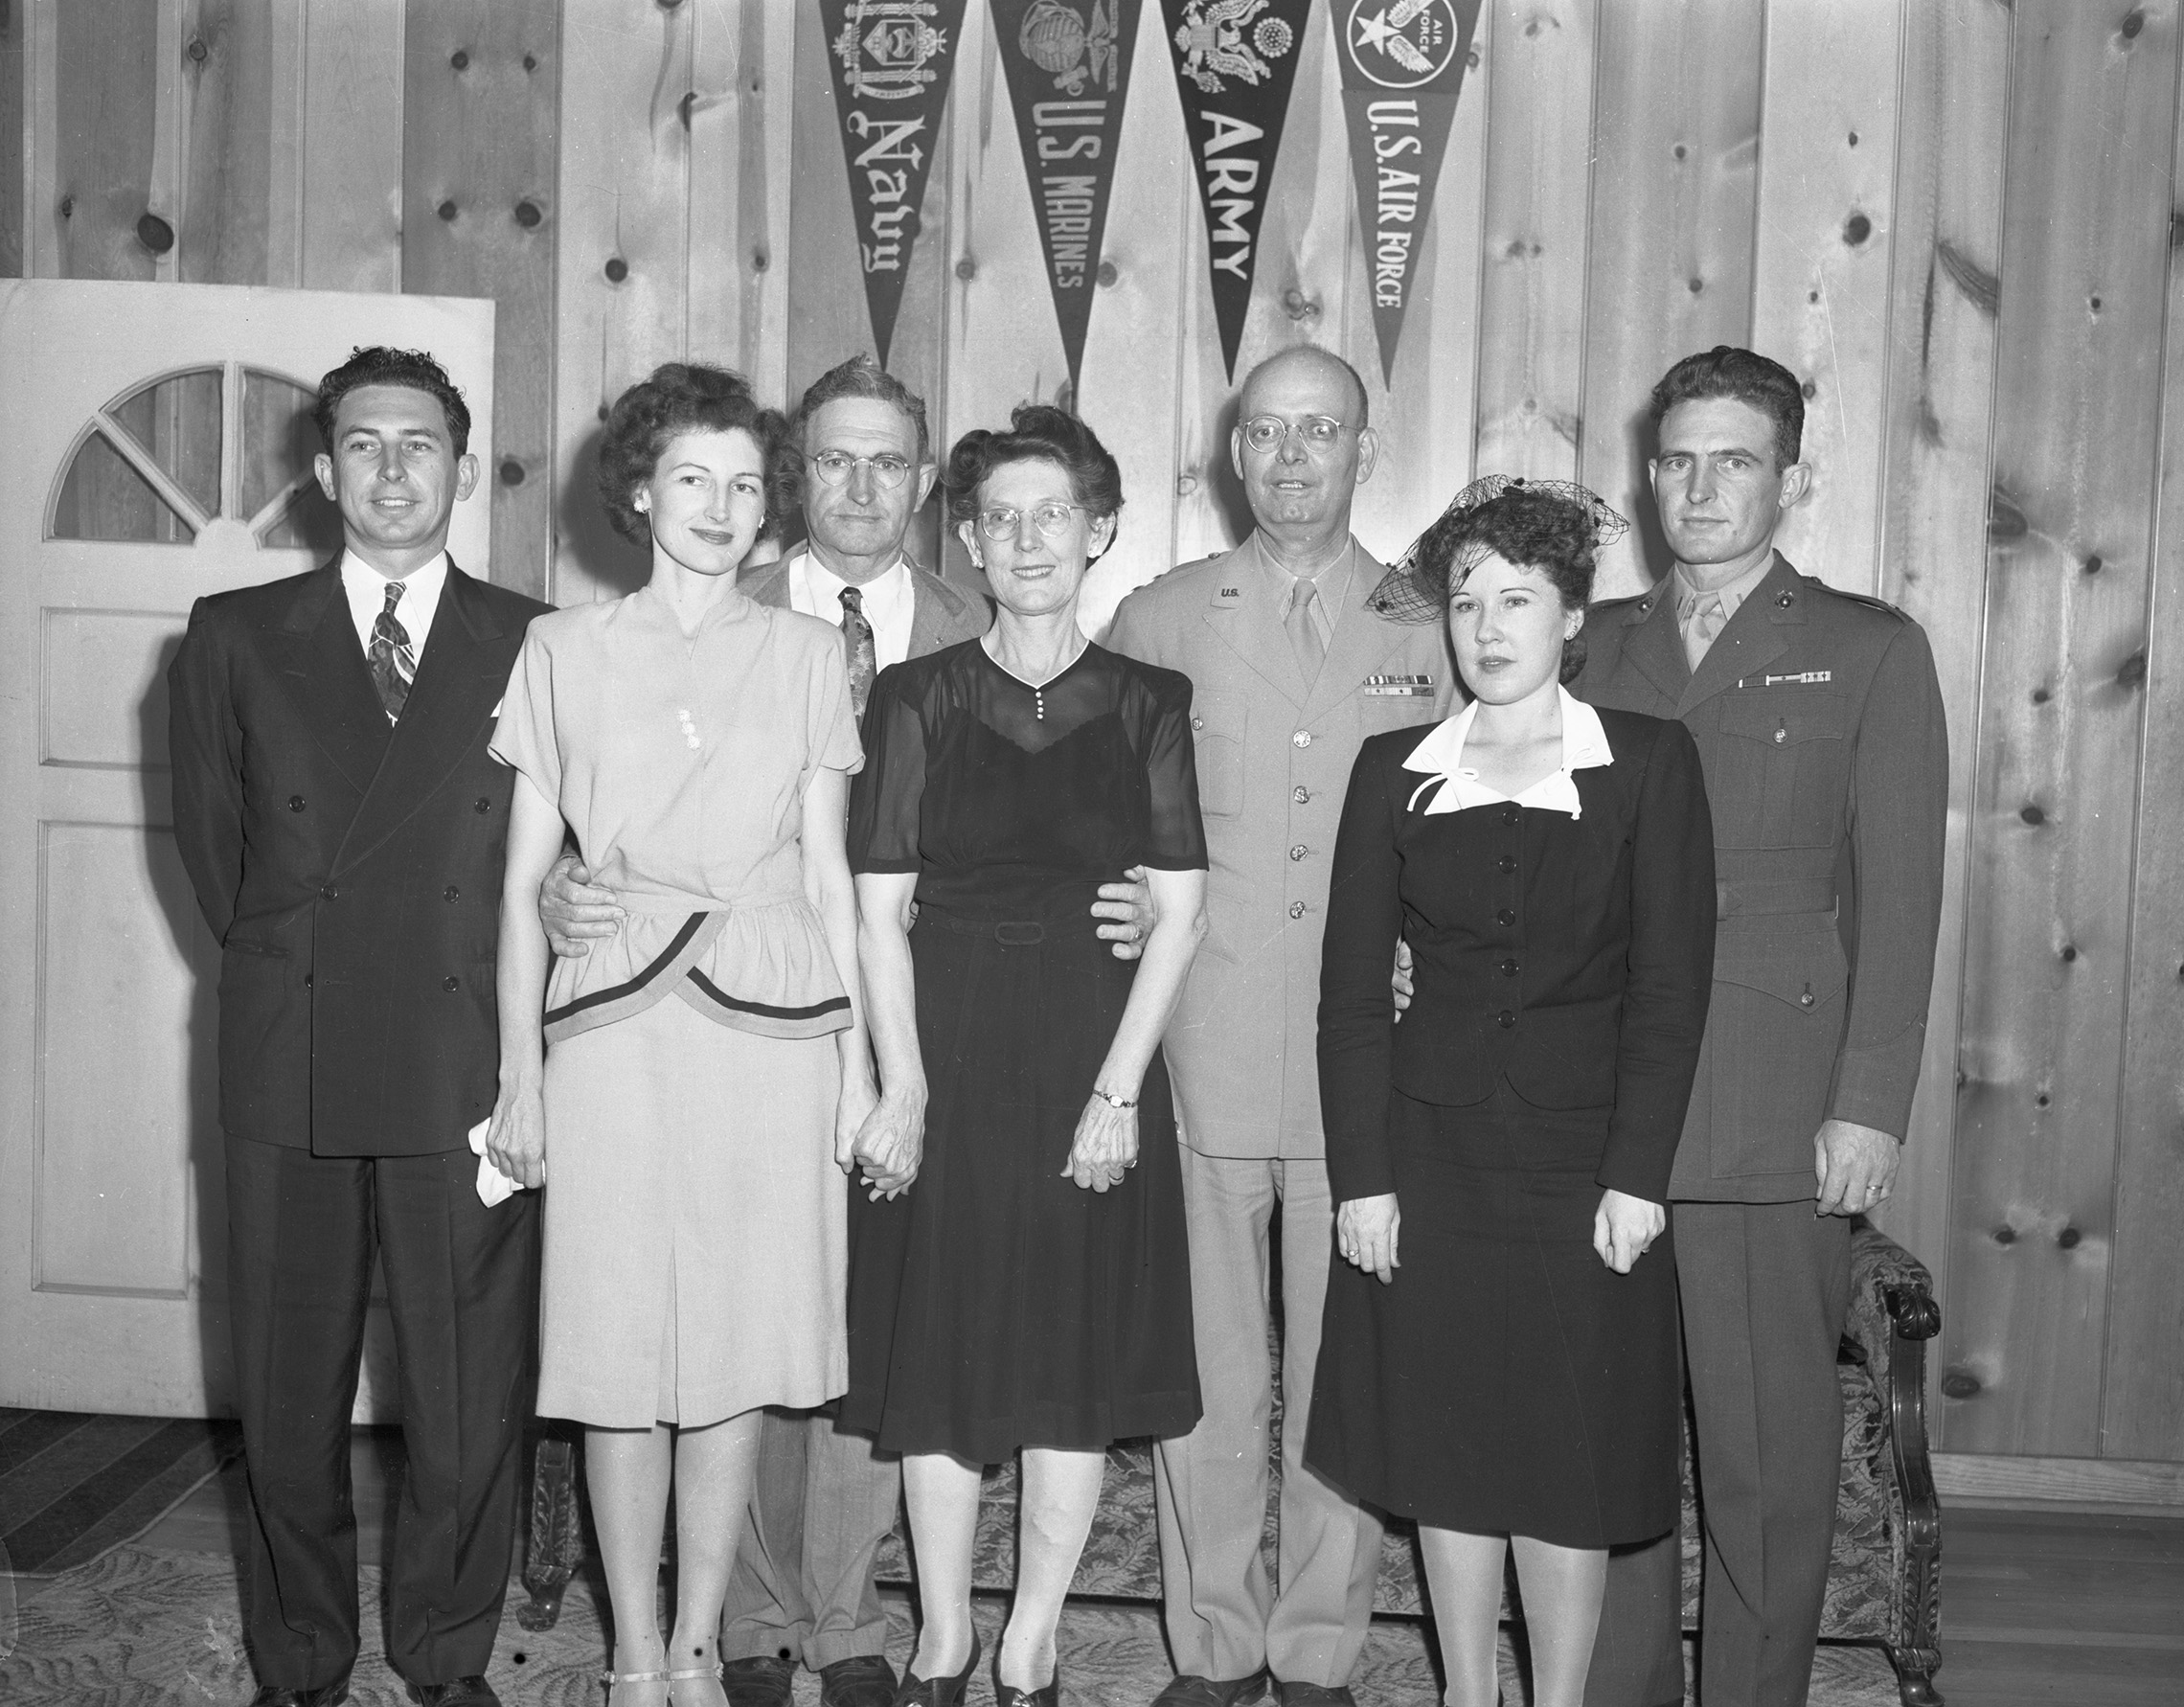 Memorial service for Lieutenant Colonel William J. Boydstun, May 6, 1945. Left to Right: Ira S. Boydstun, Mrs. Iva Guthrie, J. J. Boydstun and Mrs. Boydstun, Major General Gilbert R. Cook, Mrs. Tylene Boydstun, William Boydstun's widow, and Lieutenant Robert Boydstun of the Marines who is at home on leave. Ira and J.J. are in suits, the women are in 1940's style dresses, Tylene Boydstun also wears a small veil on her head. General Cook and Robert are in uniform. 